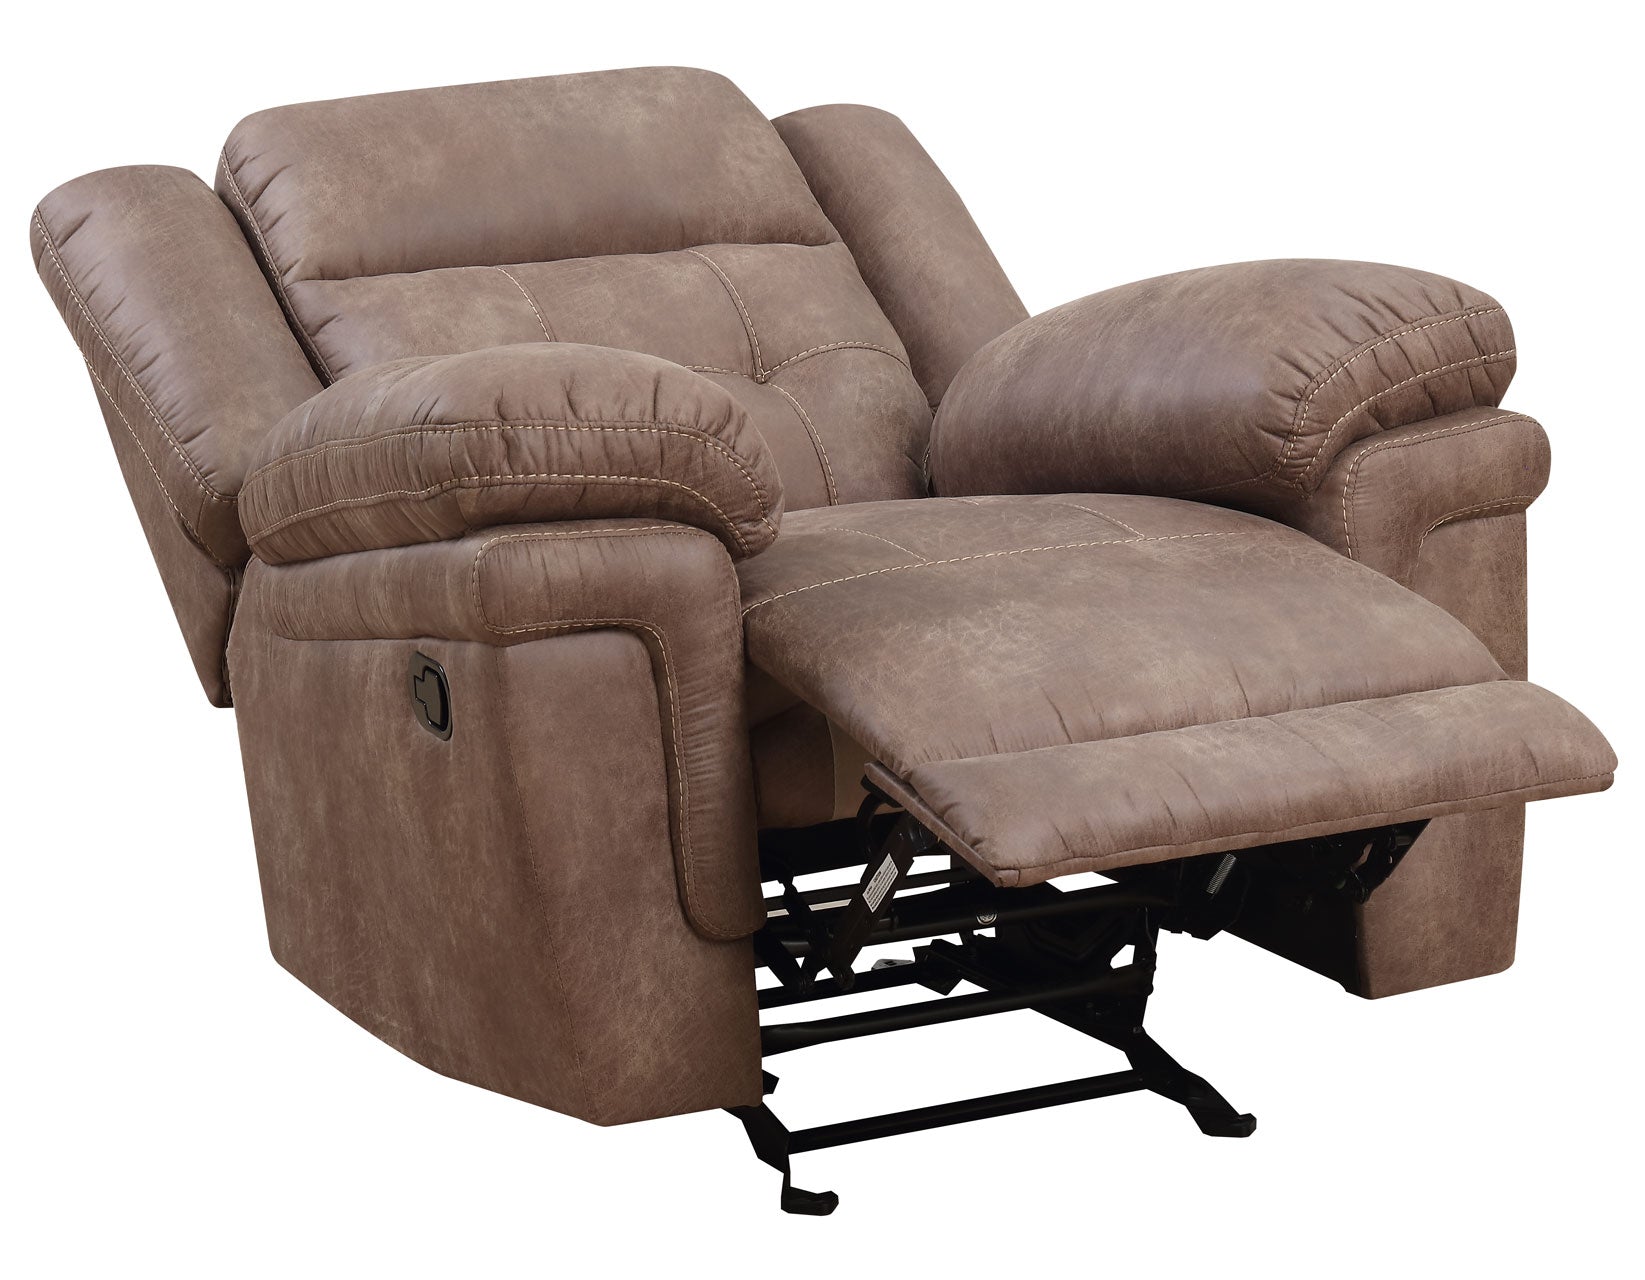 Anastasia Cocoa 3 Piece Manual Motion Set(Sofa, Loveseat & Chair) by Steve Silver